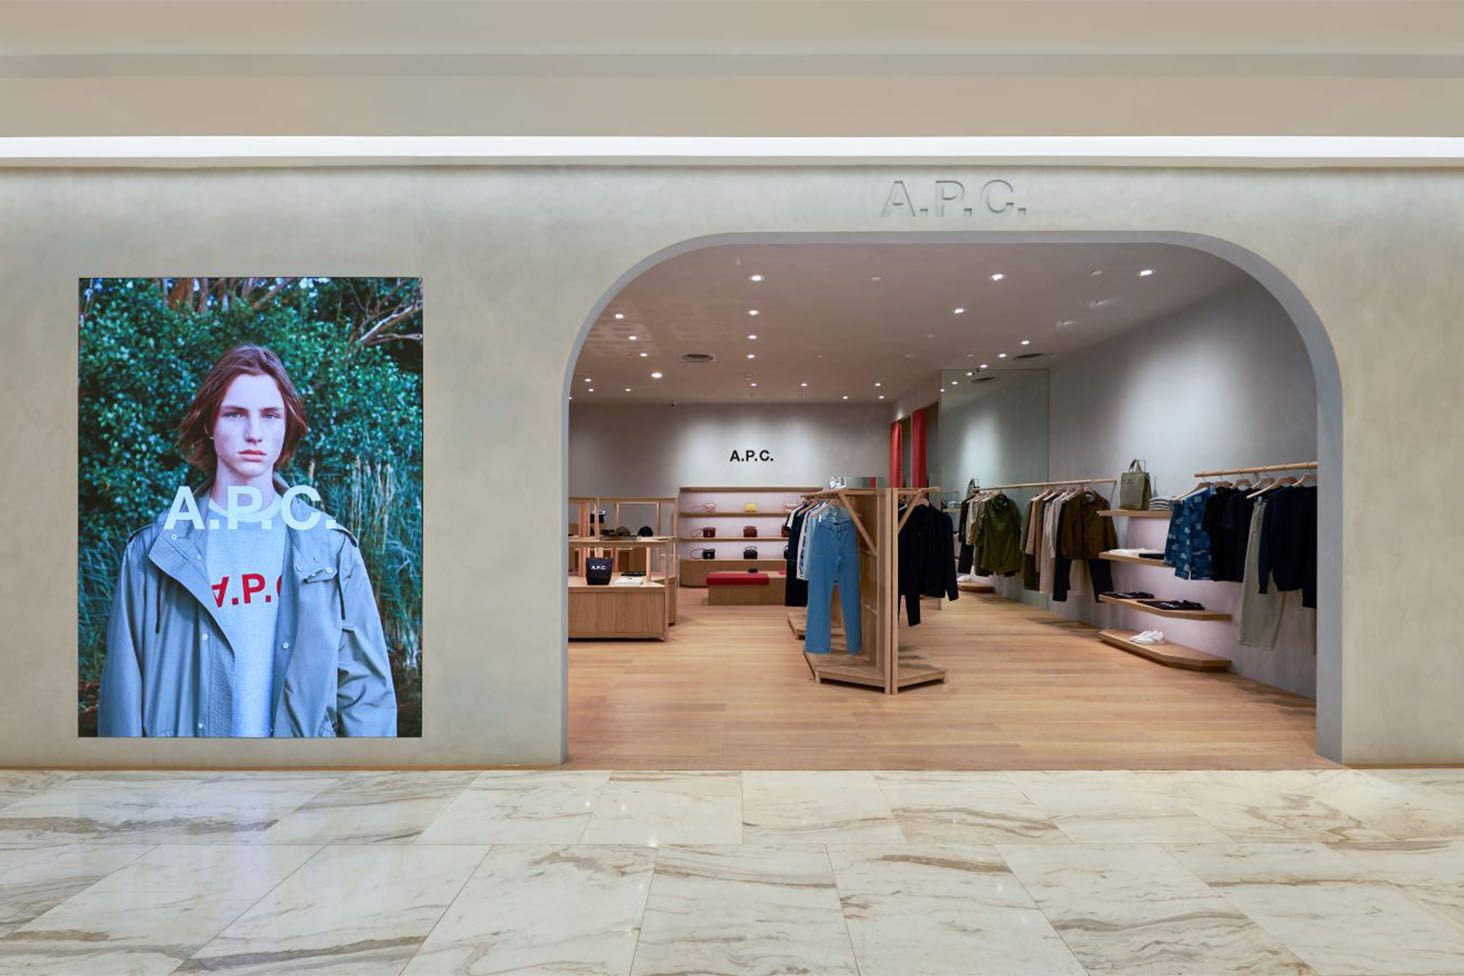 Opening of the first A.P.C. shop in Taipei